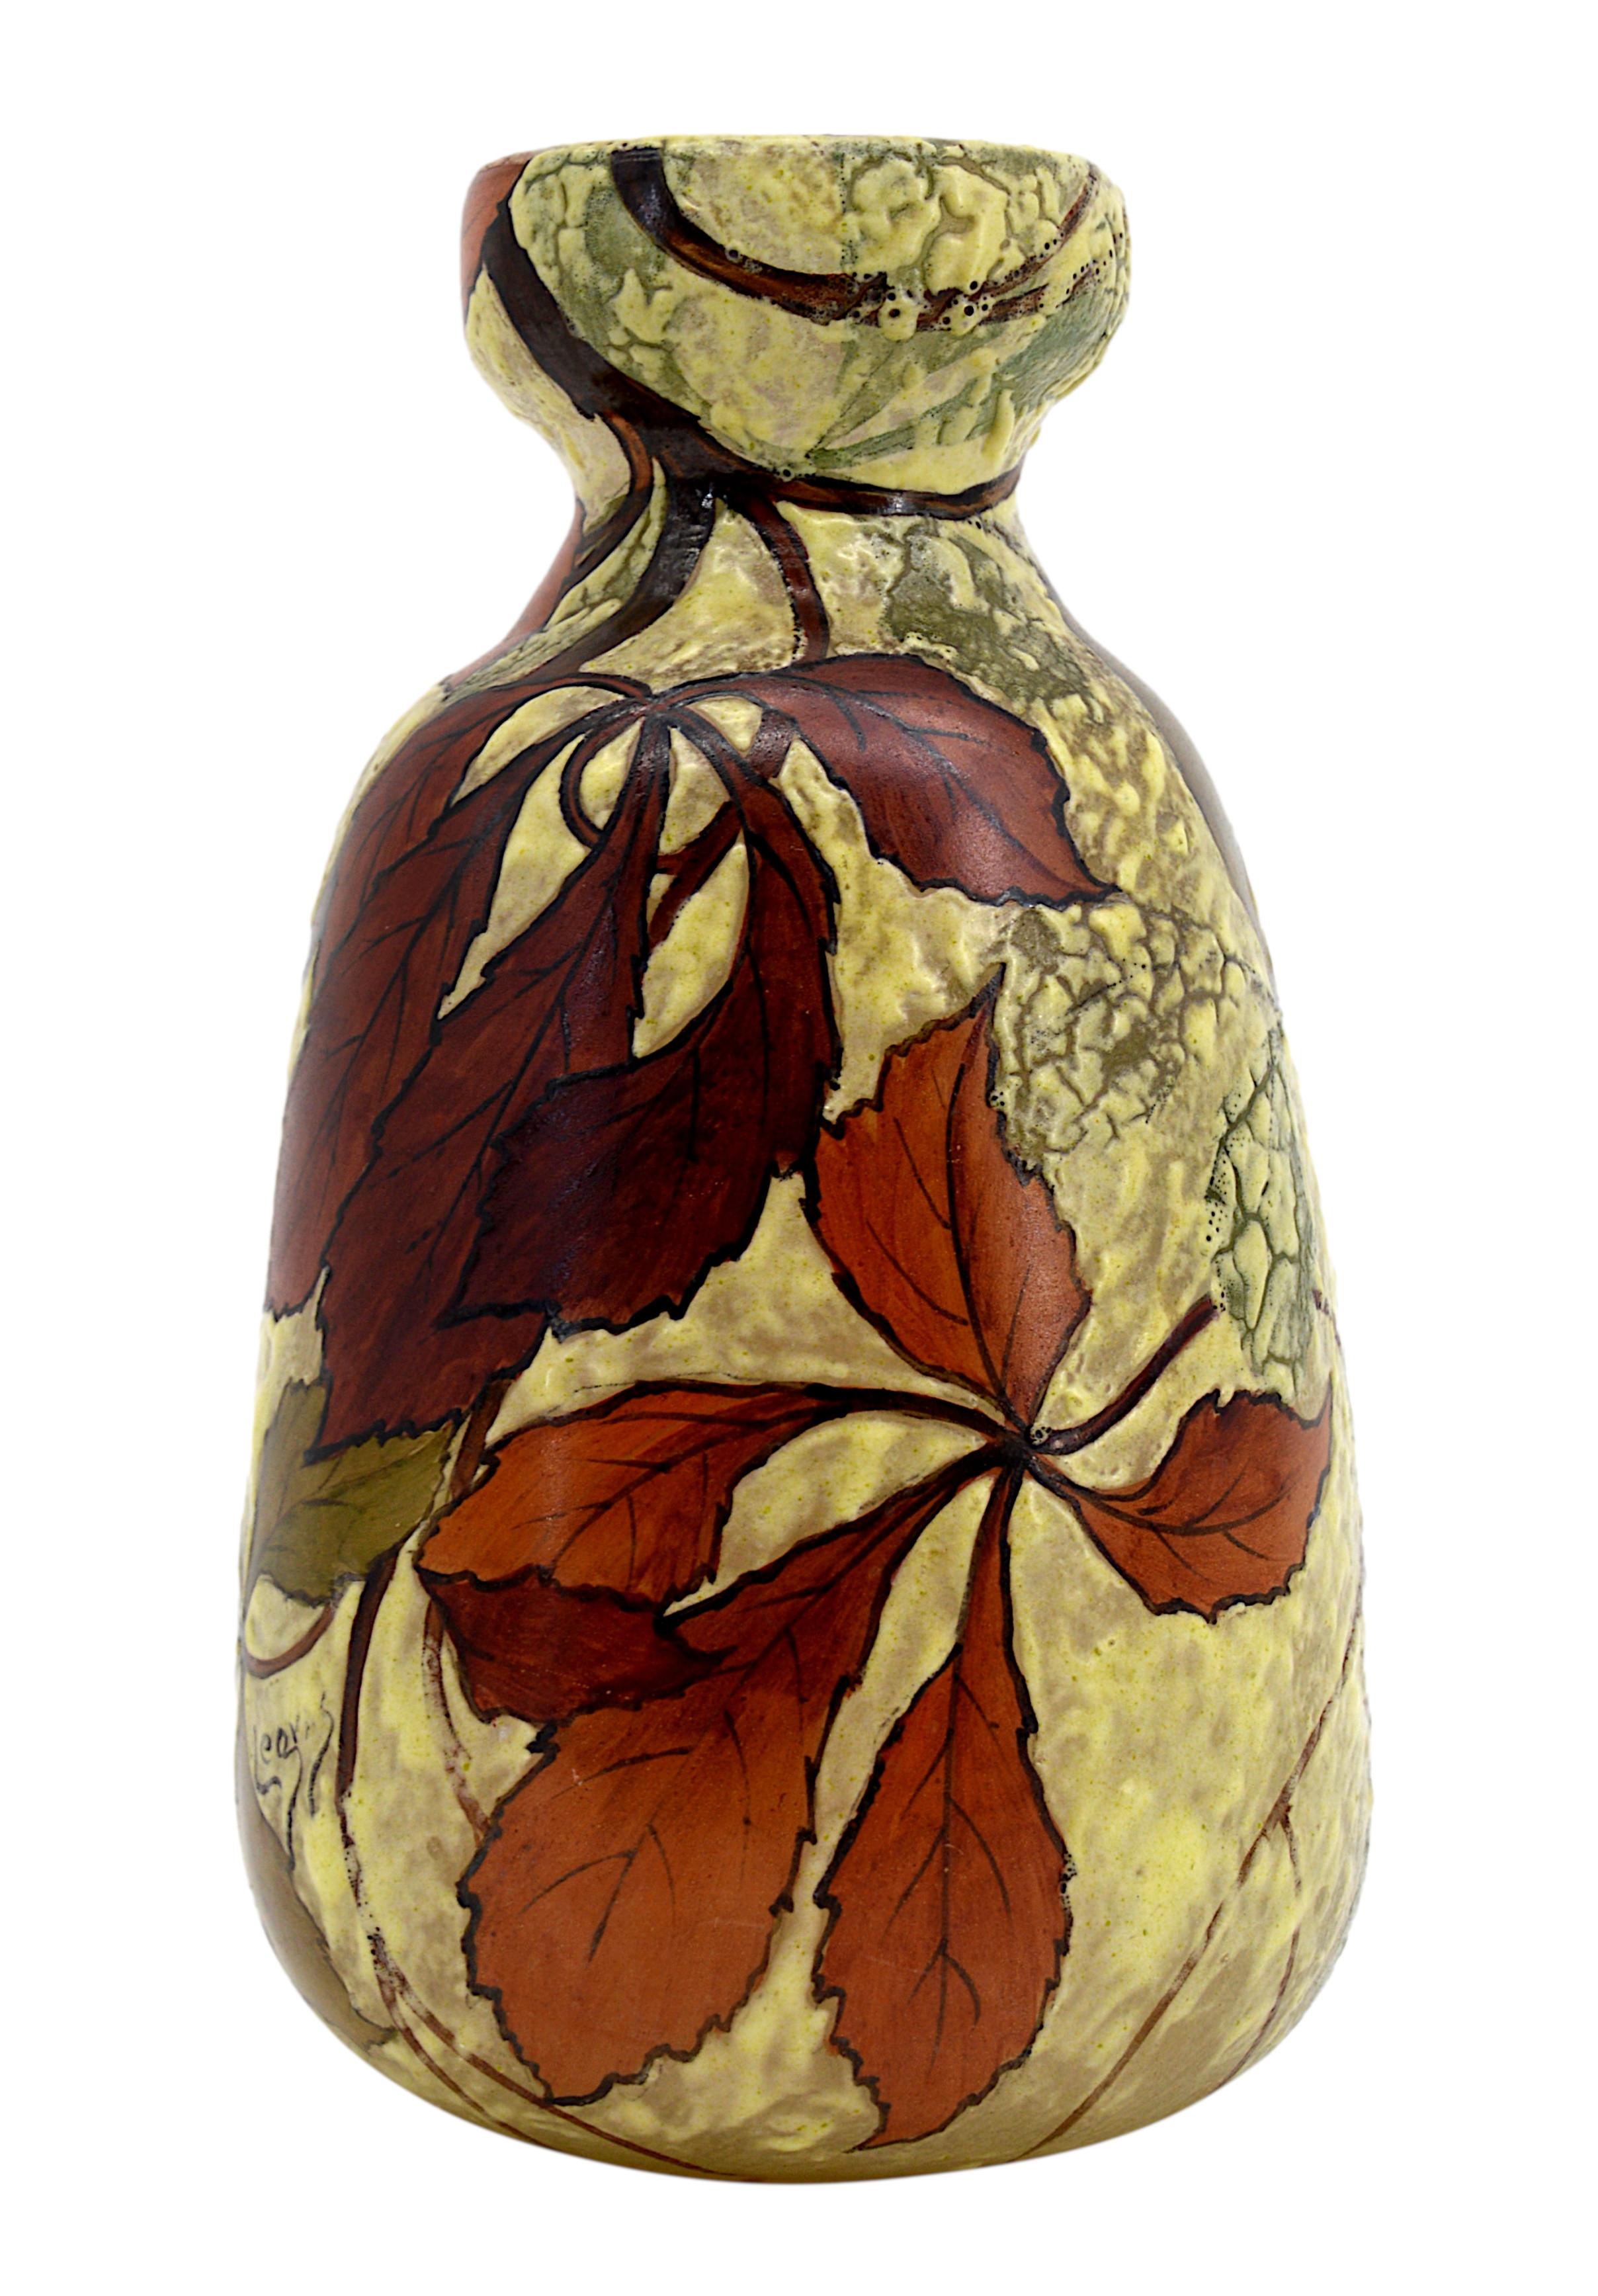 Rare French Art Nouveau vase by François-Théodore Legras, France, Early 1900s. Very very rare vase with an uncommon shape showing a decor richly enamelled with chestnut leaves. A must for collectors ! Measures: Height : 7.7